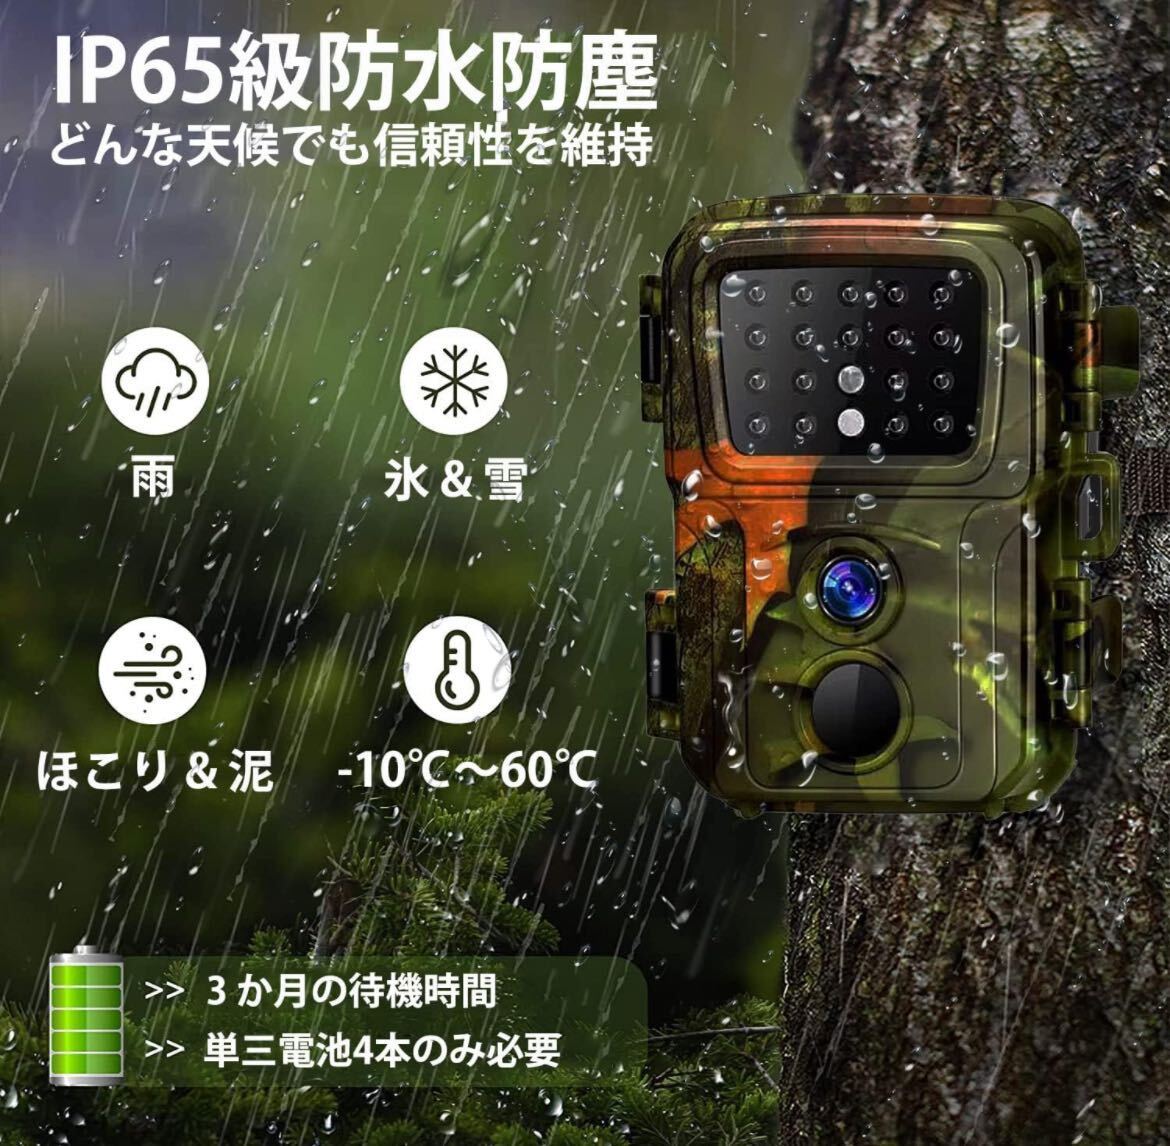  Trail camera outdoors small size 1080P full HD